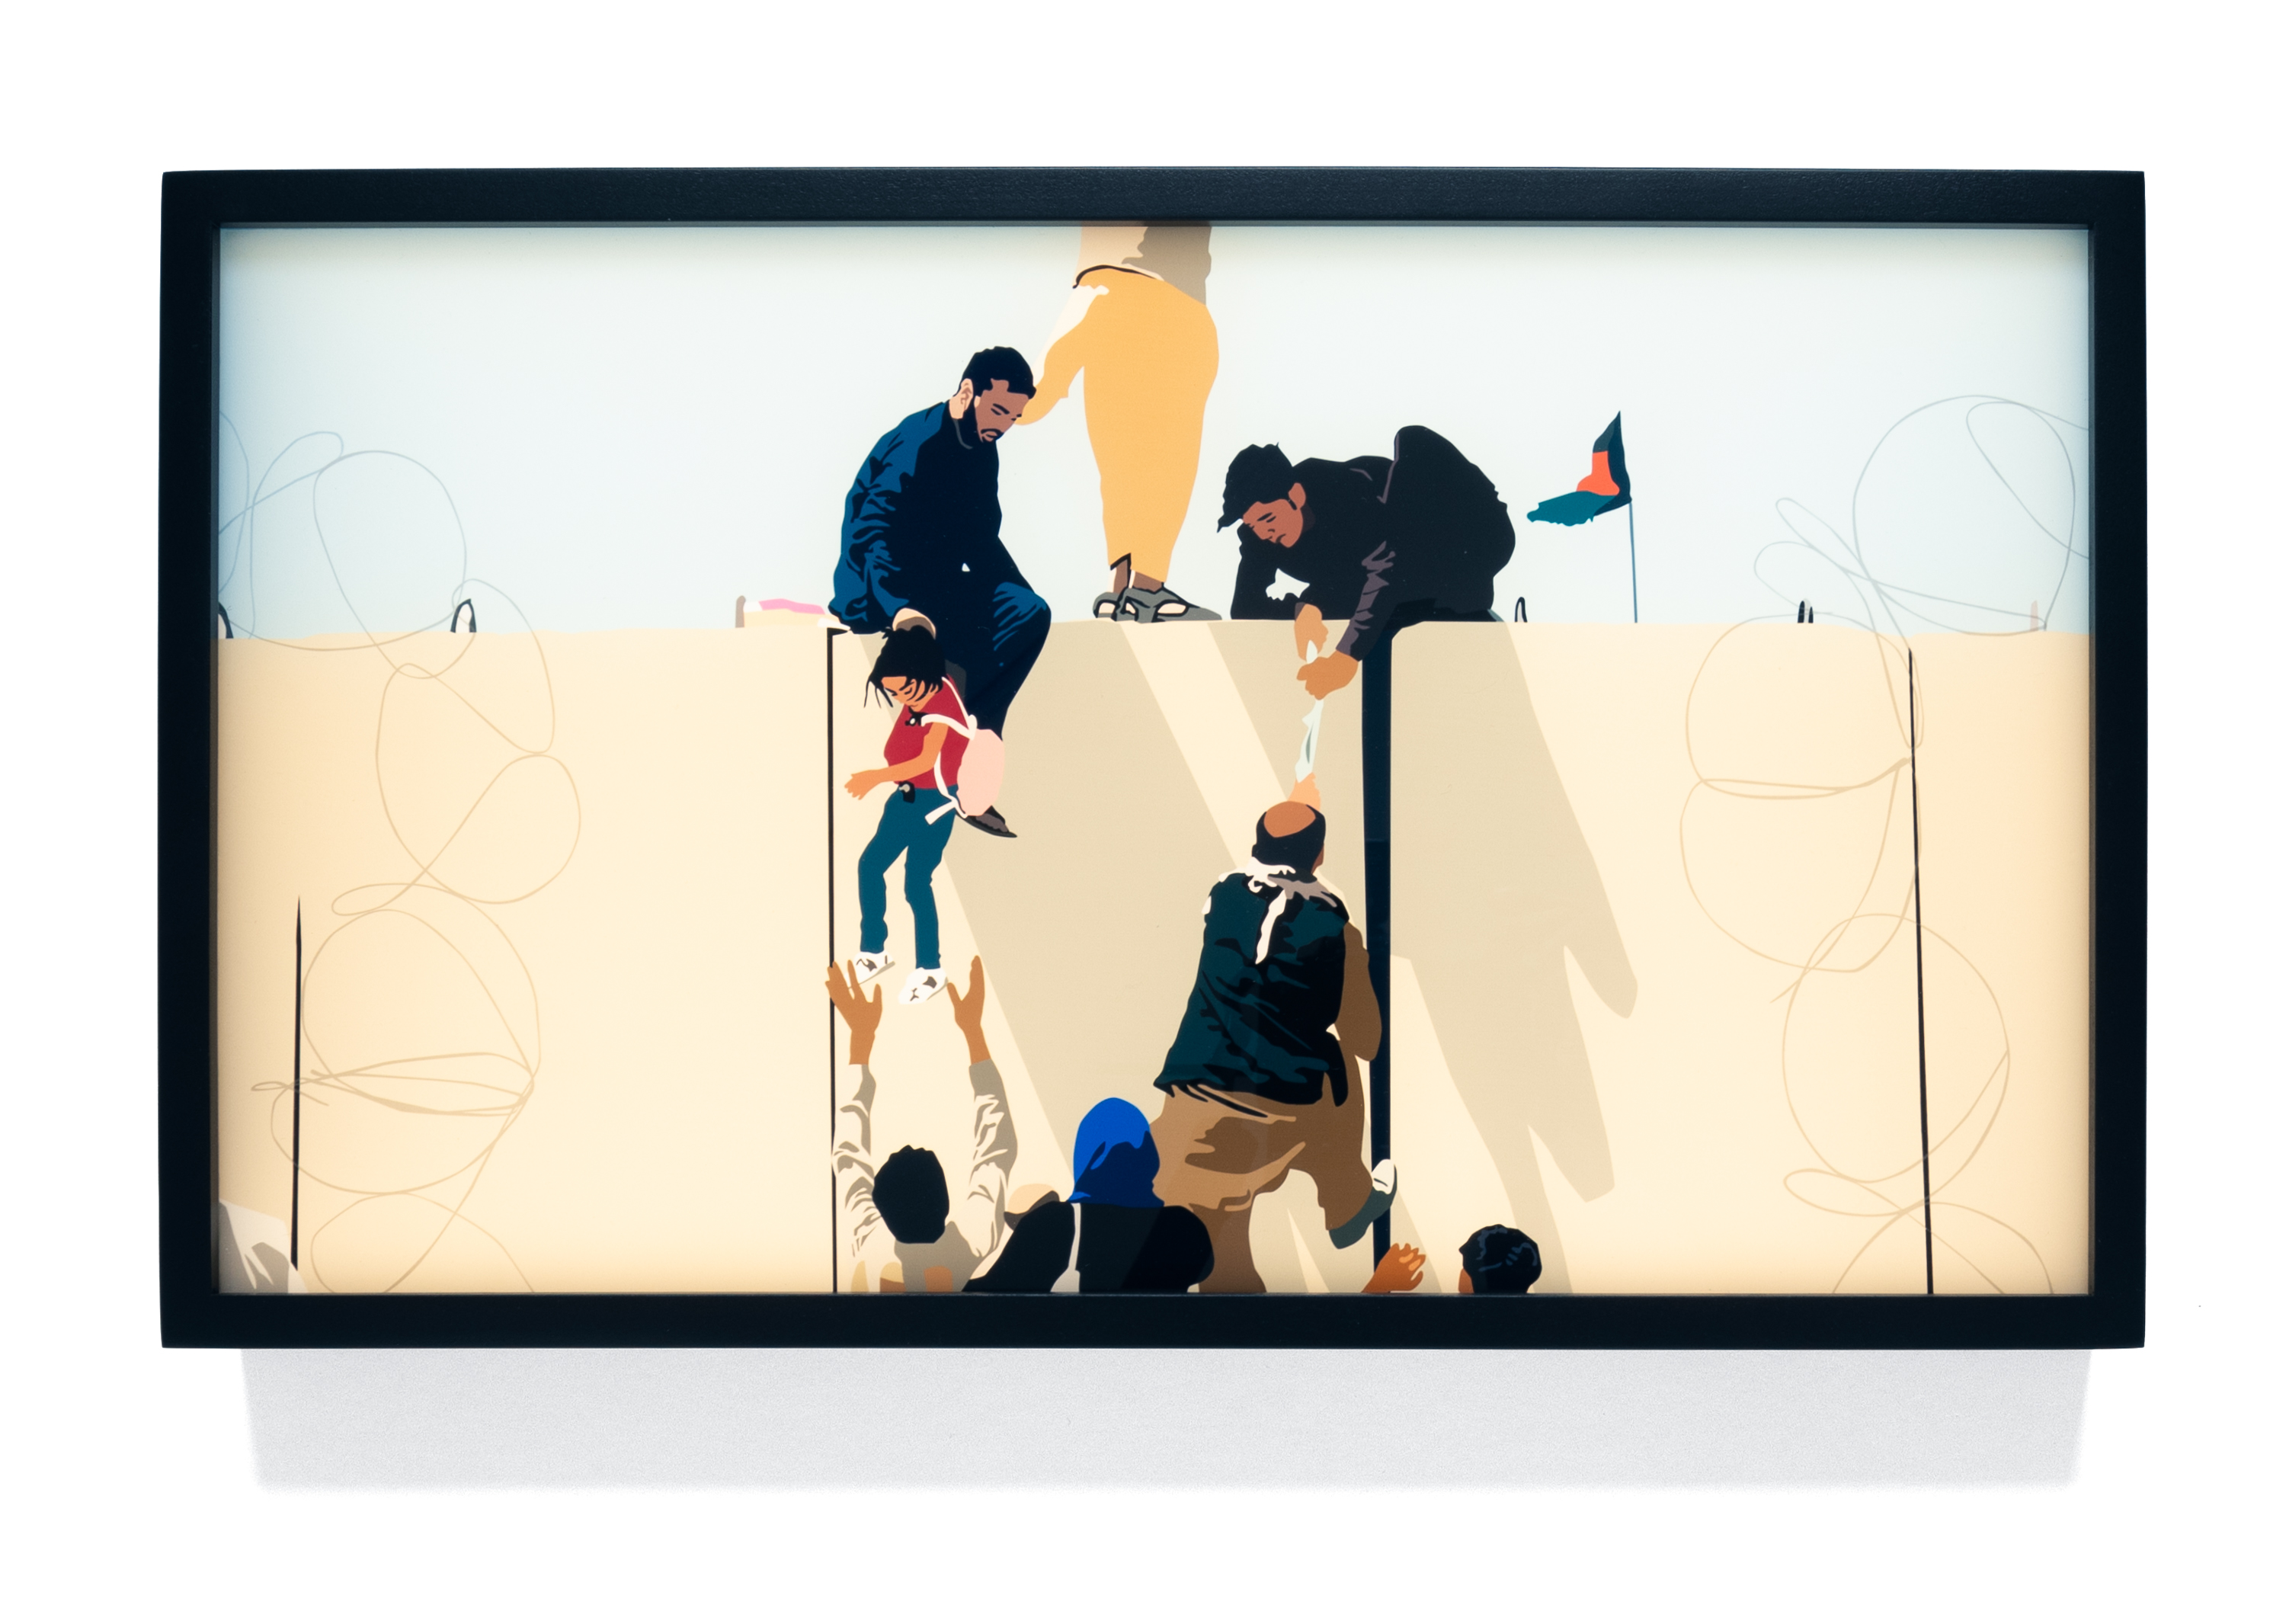 Color image of a transparency in a light box depicting figures crossing a border framed in black